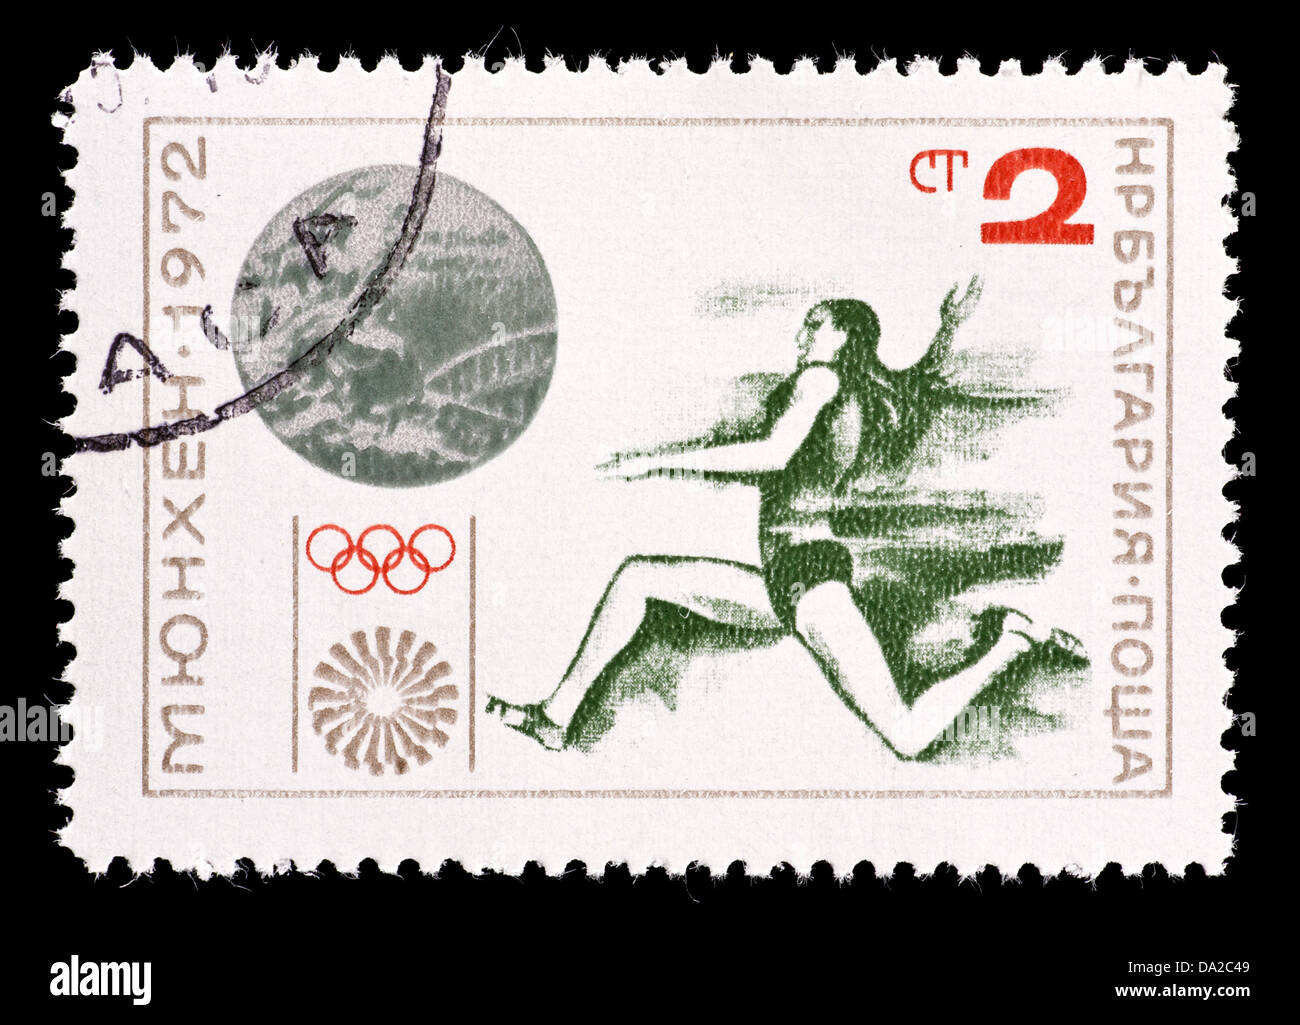 Postage stamp from Bulgaria depicting a woman long jumper and a silver medal, issued for the 1972 SUmmer Olympic Games in Munich Stock Photo